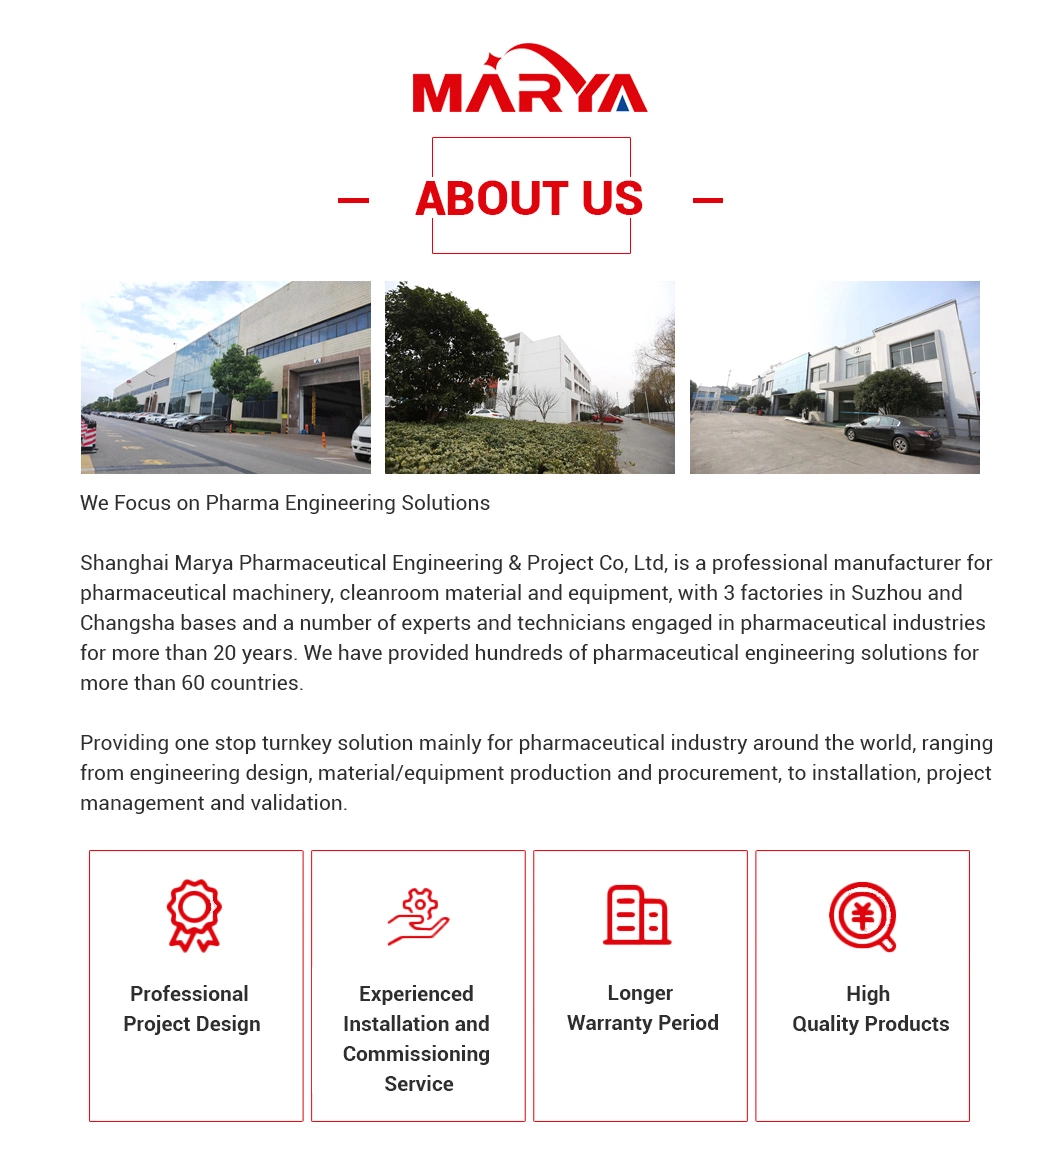 Marya Pharmaceutical Ampoule Liquid Filling Machine in Ampoule Bottle Washing Sterilizing Filling Sealing Production Line Supplier with CE ISO Certificate